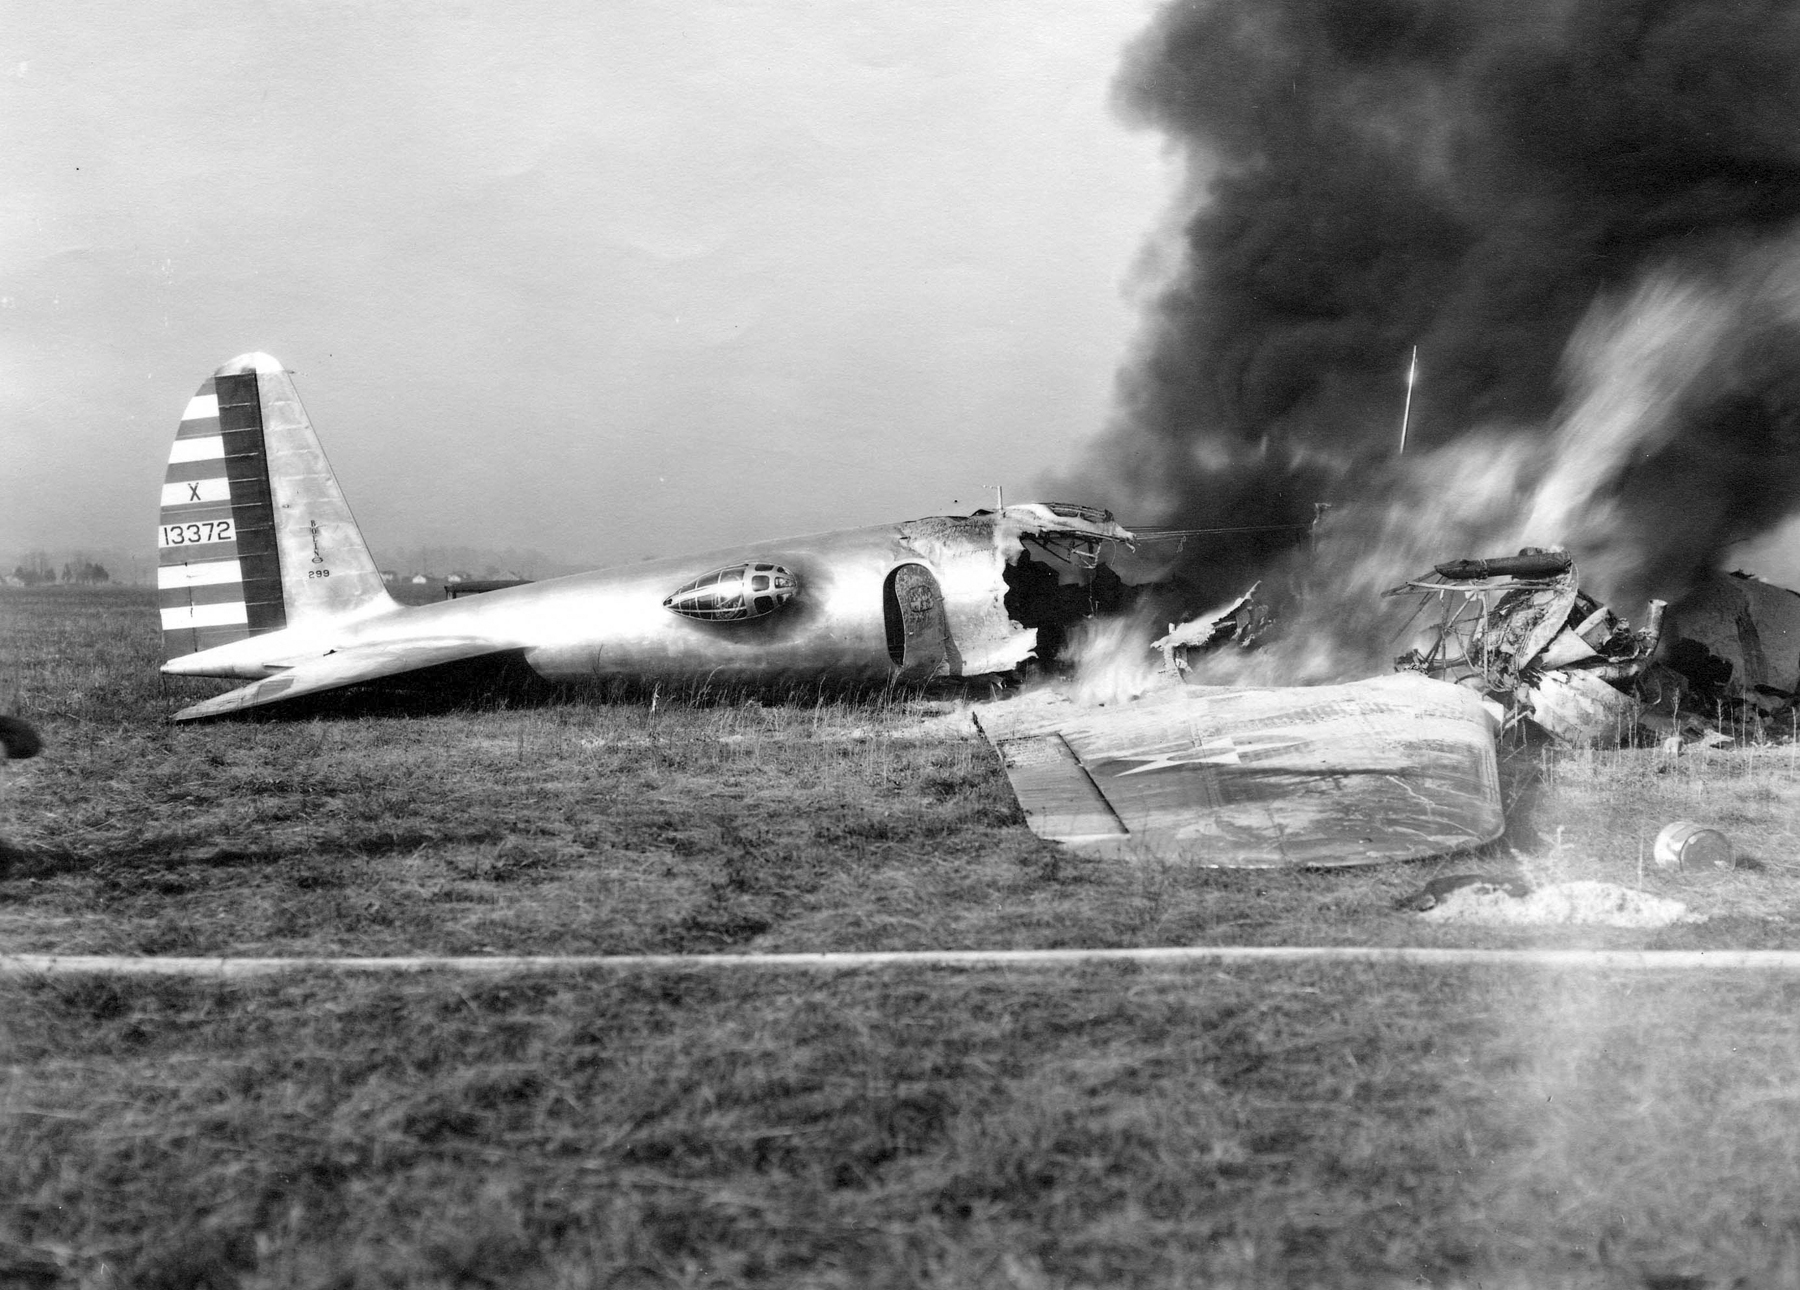 The wreck of the Boeing Model 299, NX13372, burns after the fatal crash at Wright Field, 30 October 1935. (U.S. Air Force)